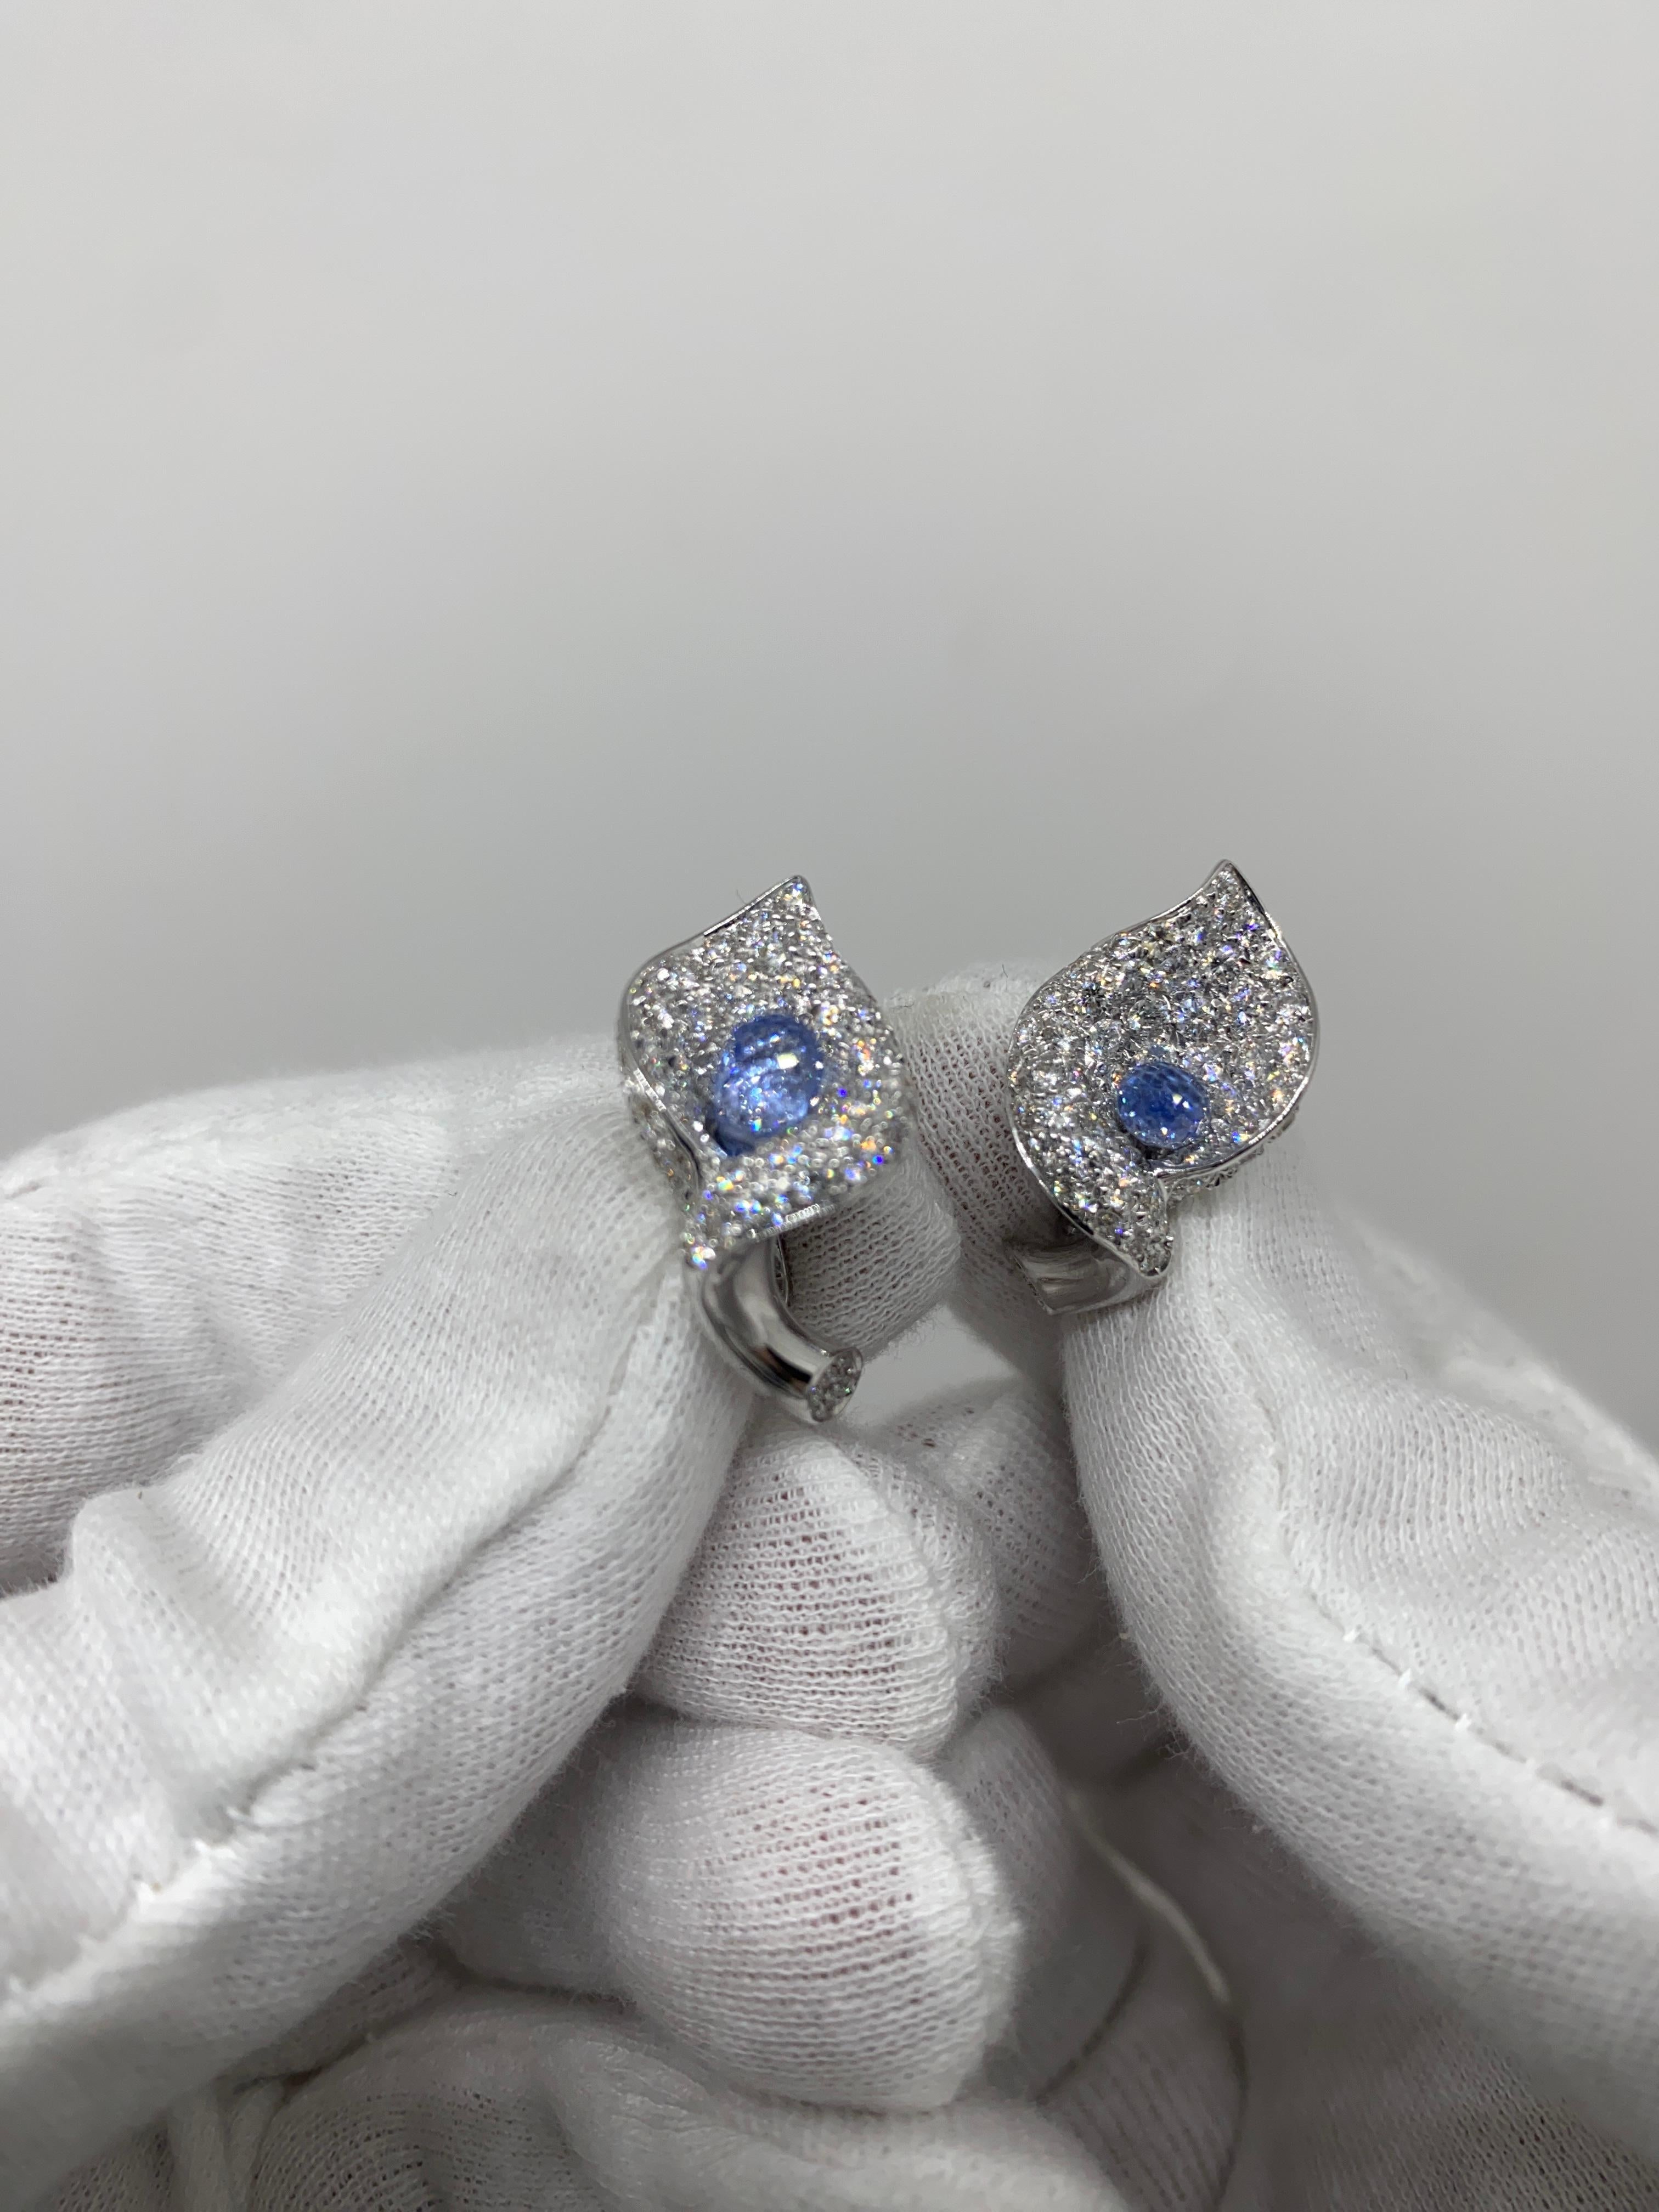 Lobe earrings made of 18kt white gold with natural brilliant-cut diamonds for ct.3.16 and briole'-cut sapphires for ct .4.27

Welcome to our jewelry collection, where every piece tells a story of timeless elegance and unparalleled craftsmanship. As